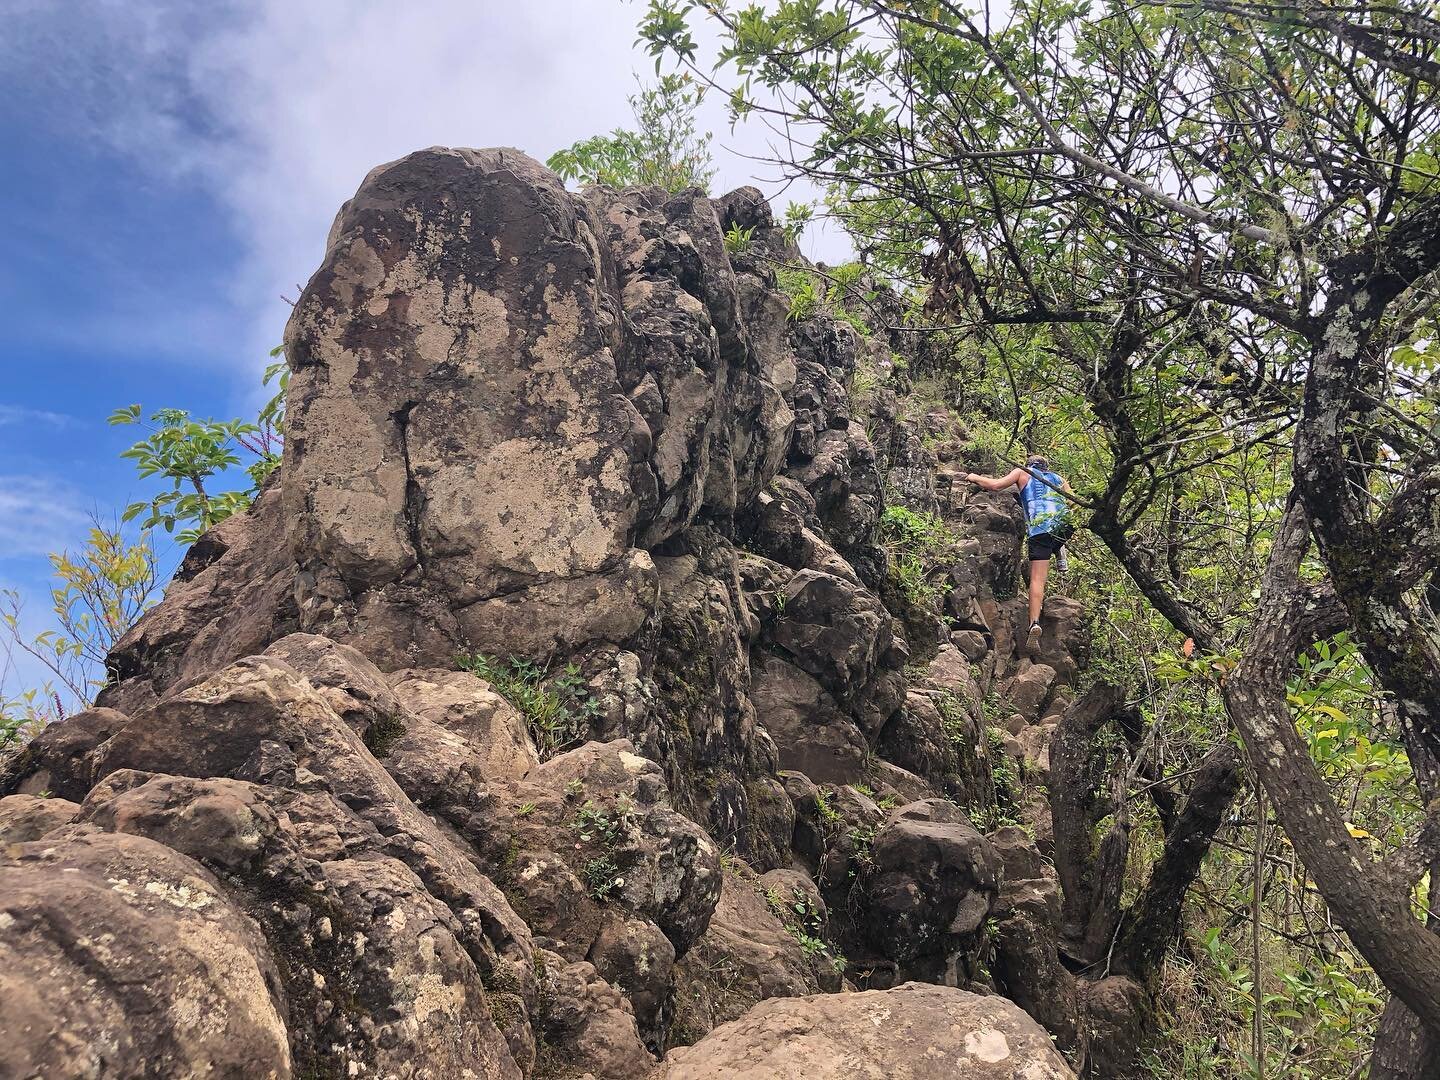 I spy @indigoarmour like a cloud climbing up to the sky. ⛅️💙

So grateful to have gotten a hike in before Hawaii&rsquo;s trails closed for COVID measures. Stay safe &amp; healthy everyone.